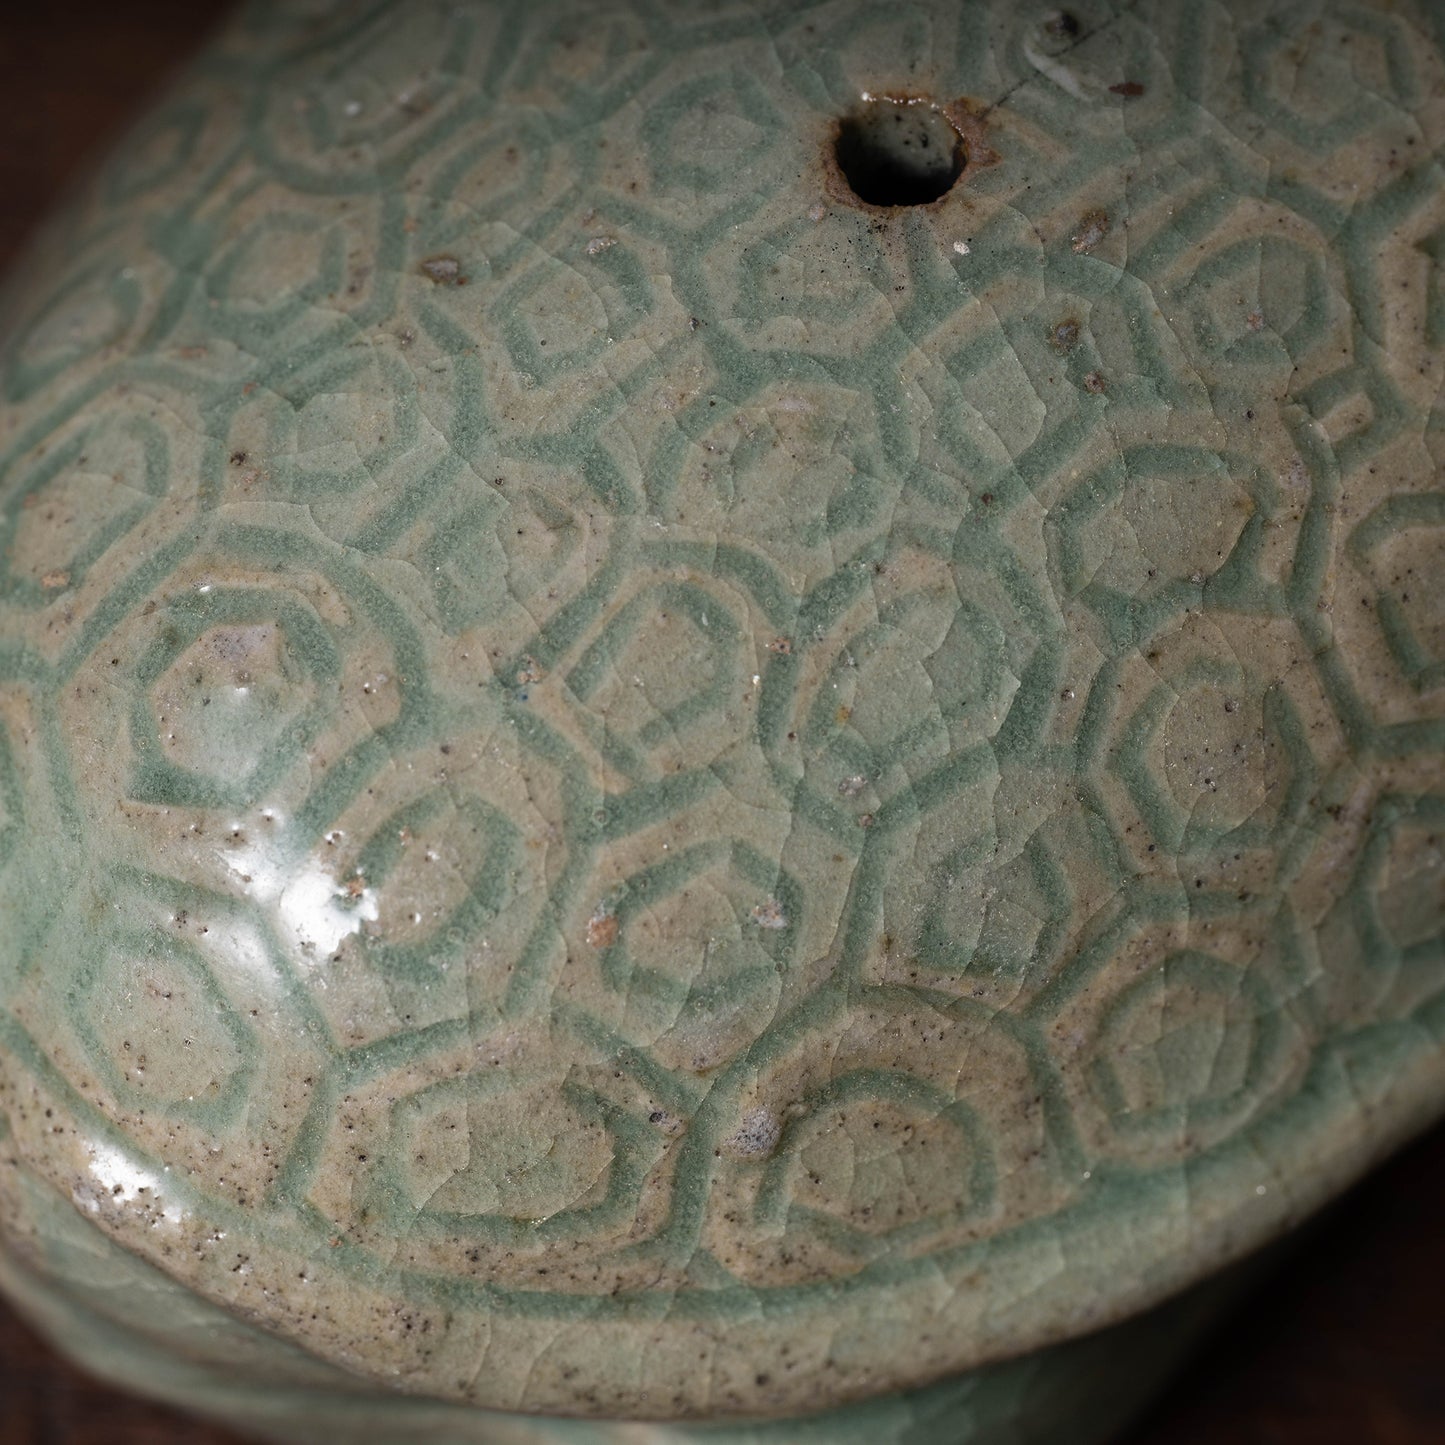 Goryeo Celadon Tortoise-Shaped Water Dropper with Incised